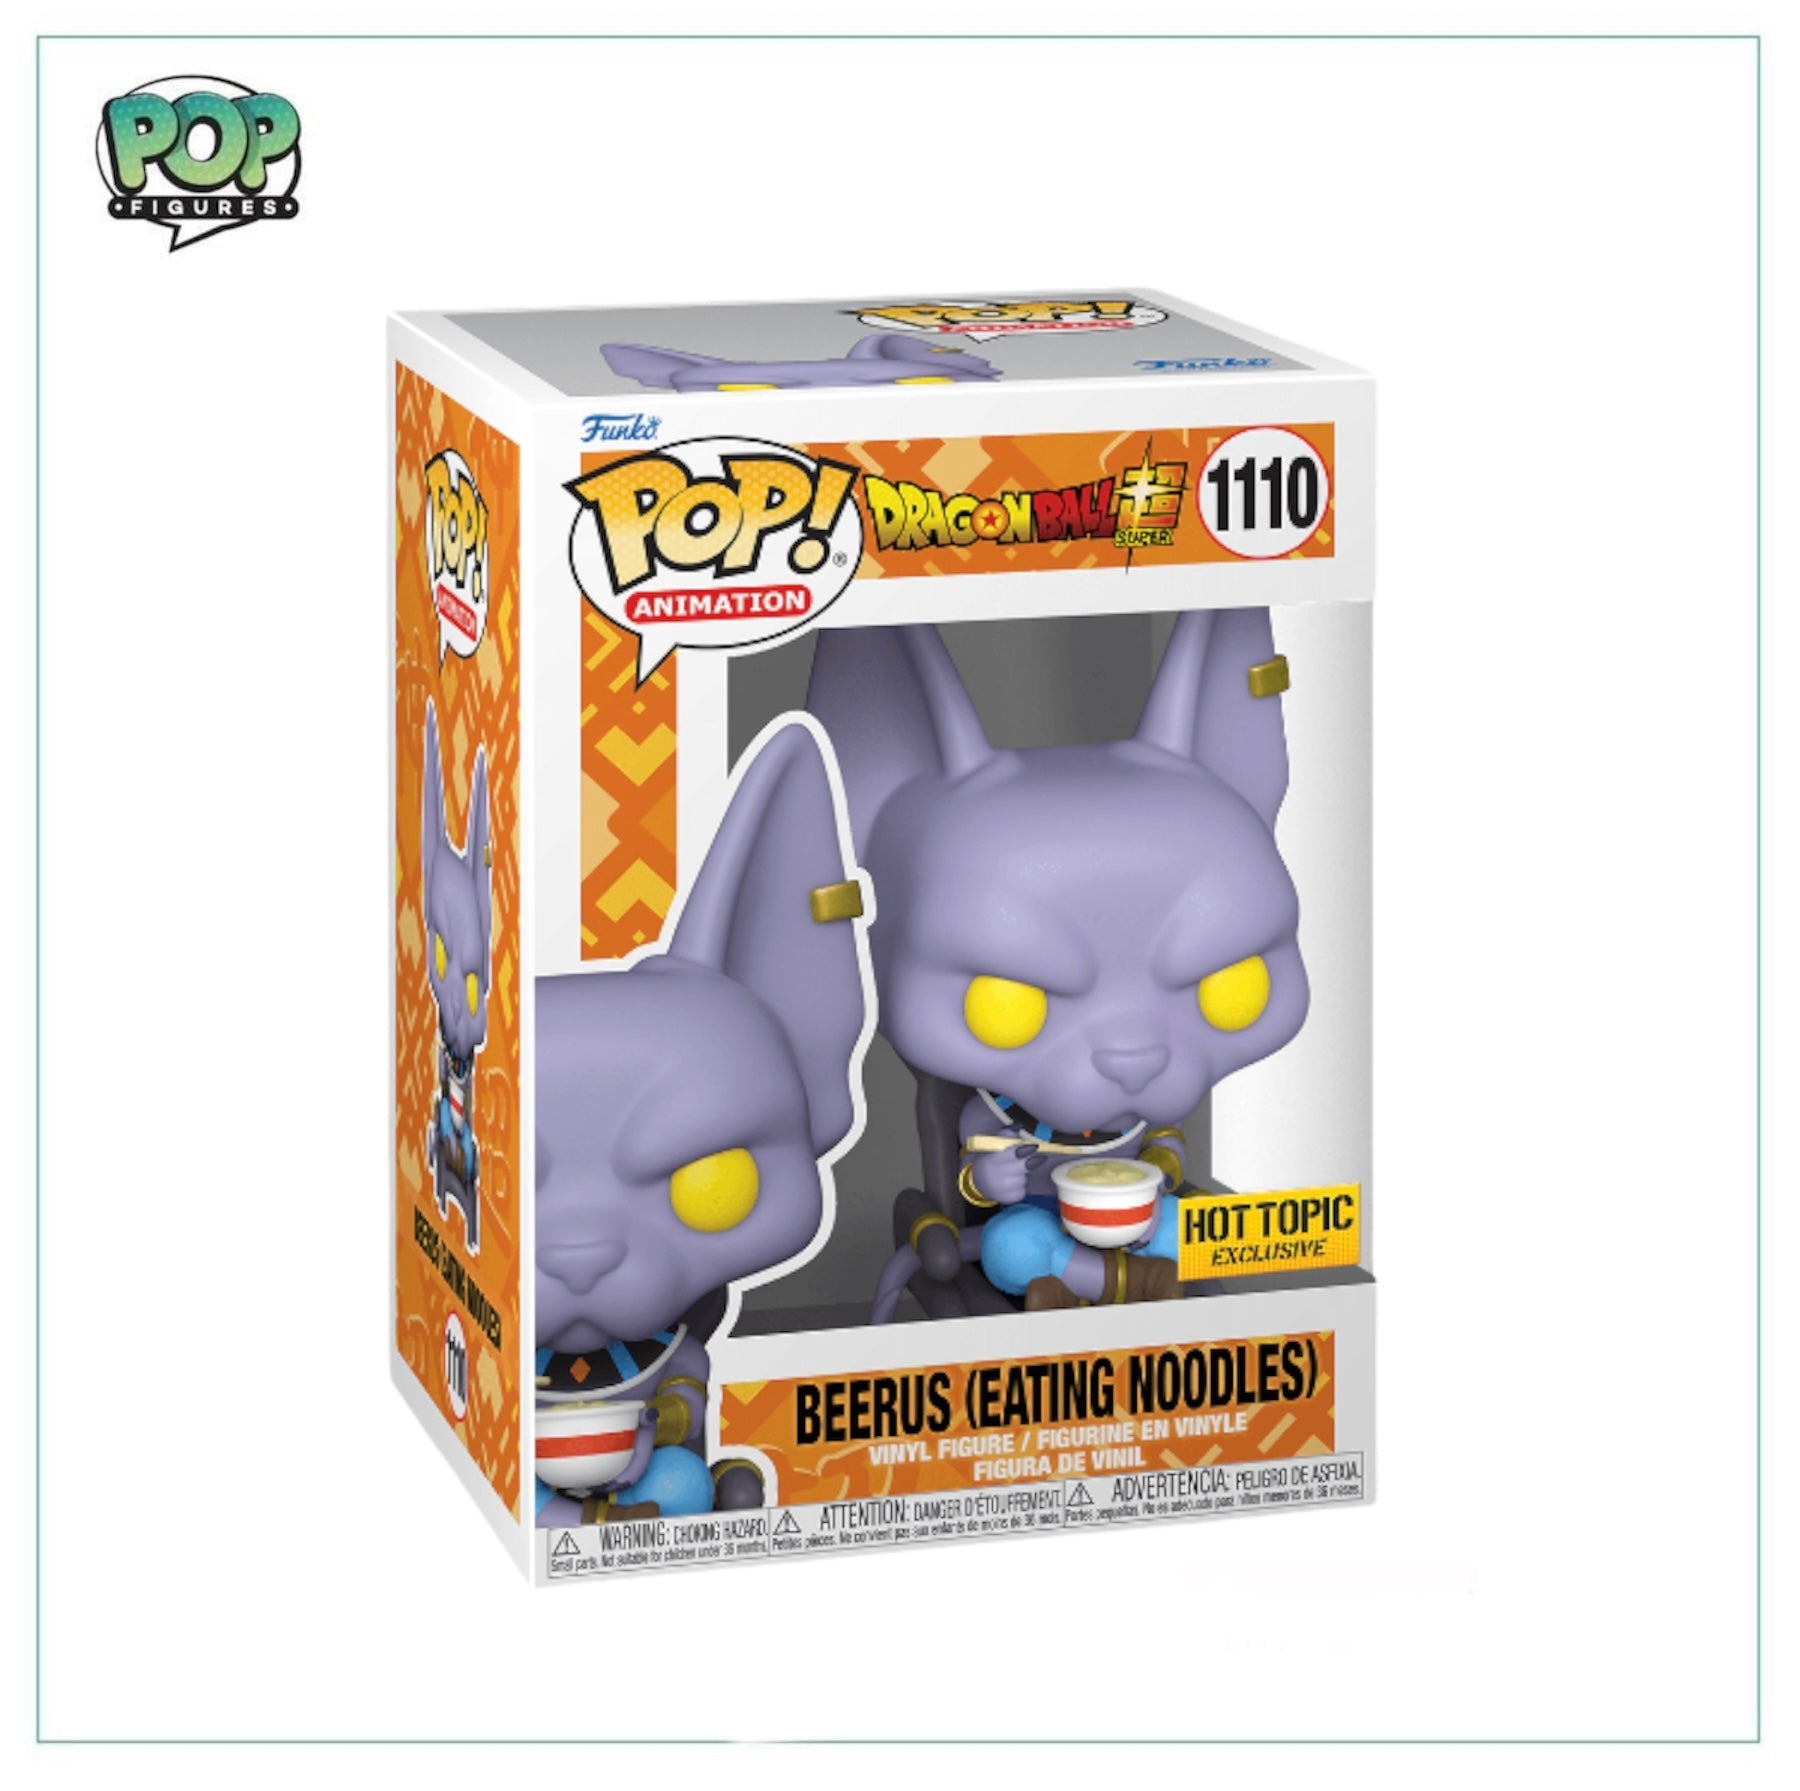 Beerus (Eating Noodles) #1110 Funko Pop! - Dragon Ball Super - Hot Topic Exclusive - Angry Cat